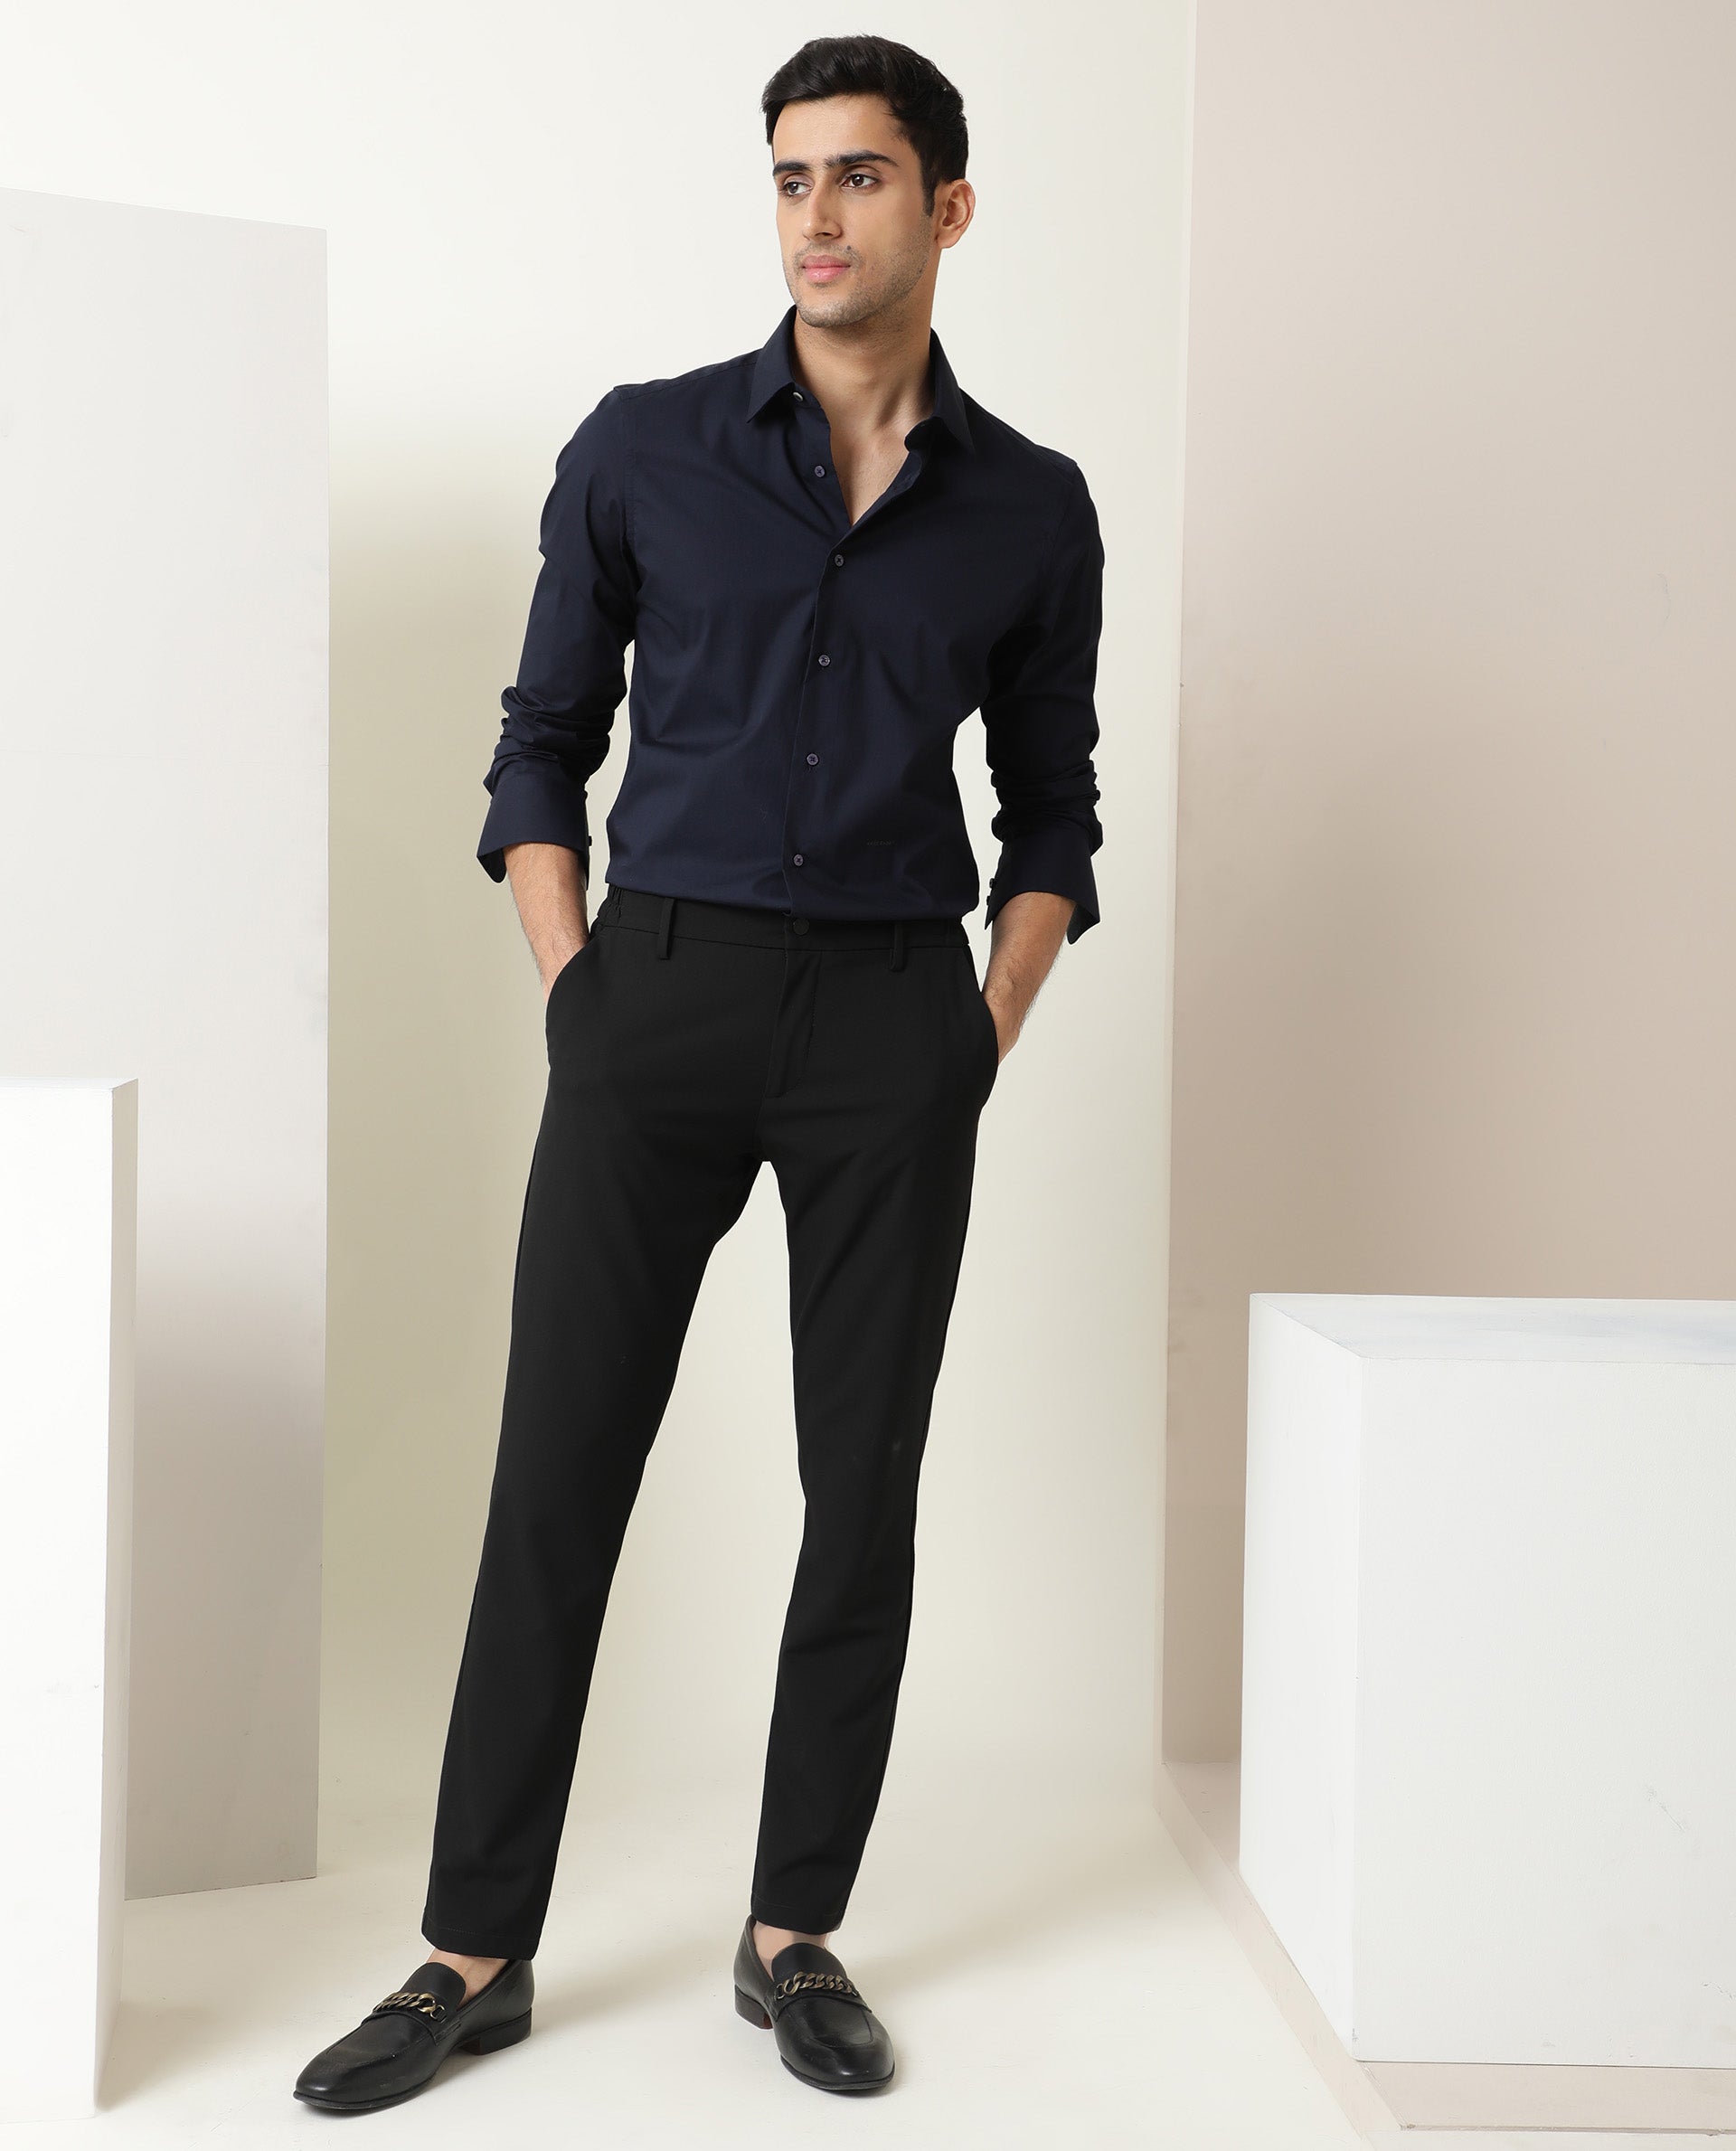 How To Wear A Black Shirt With Navy Pants • Ready Sleek